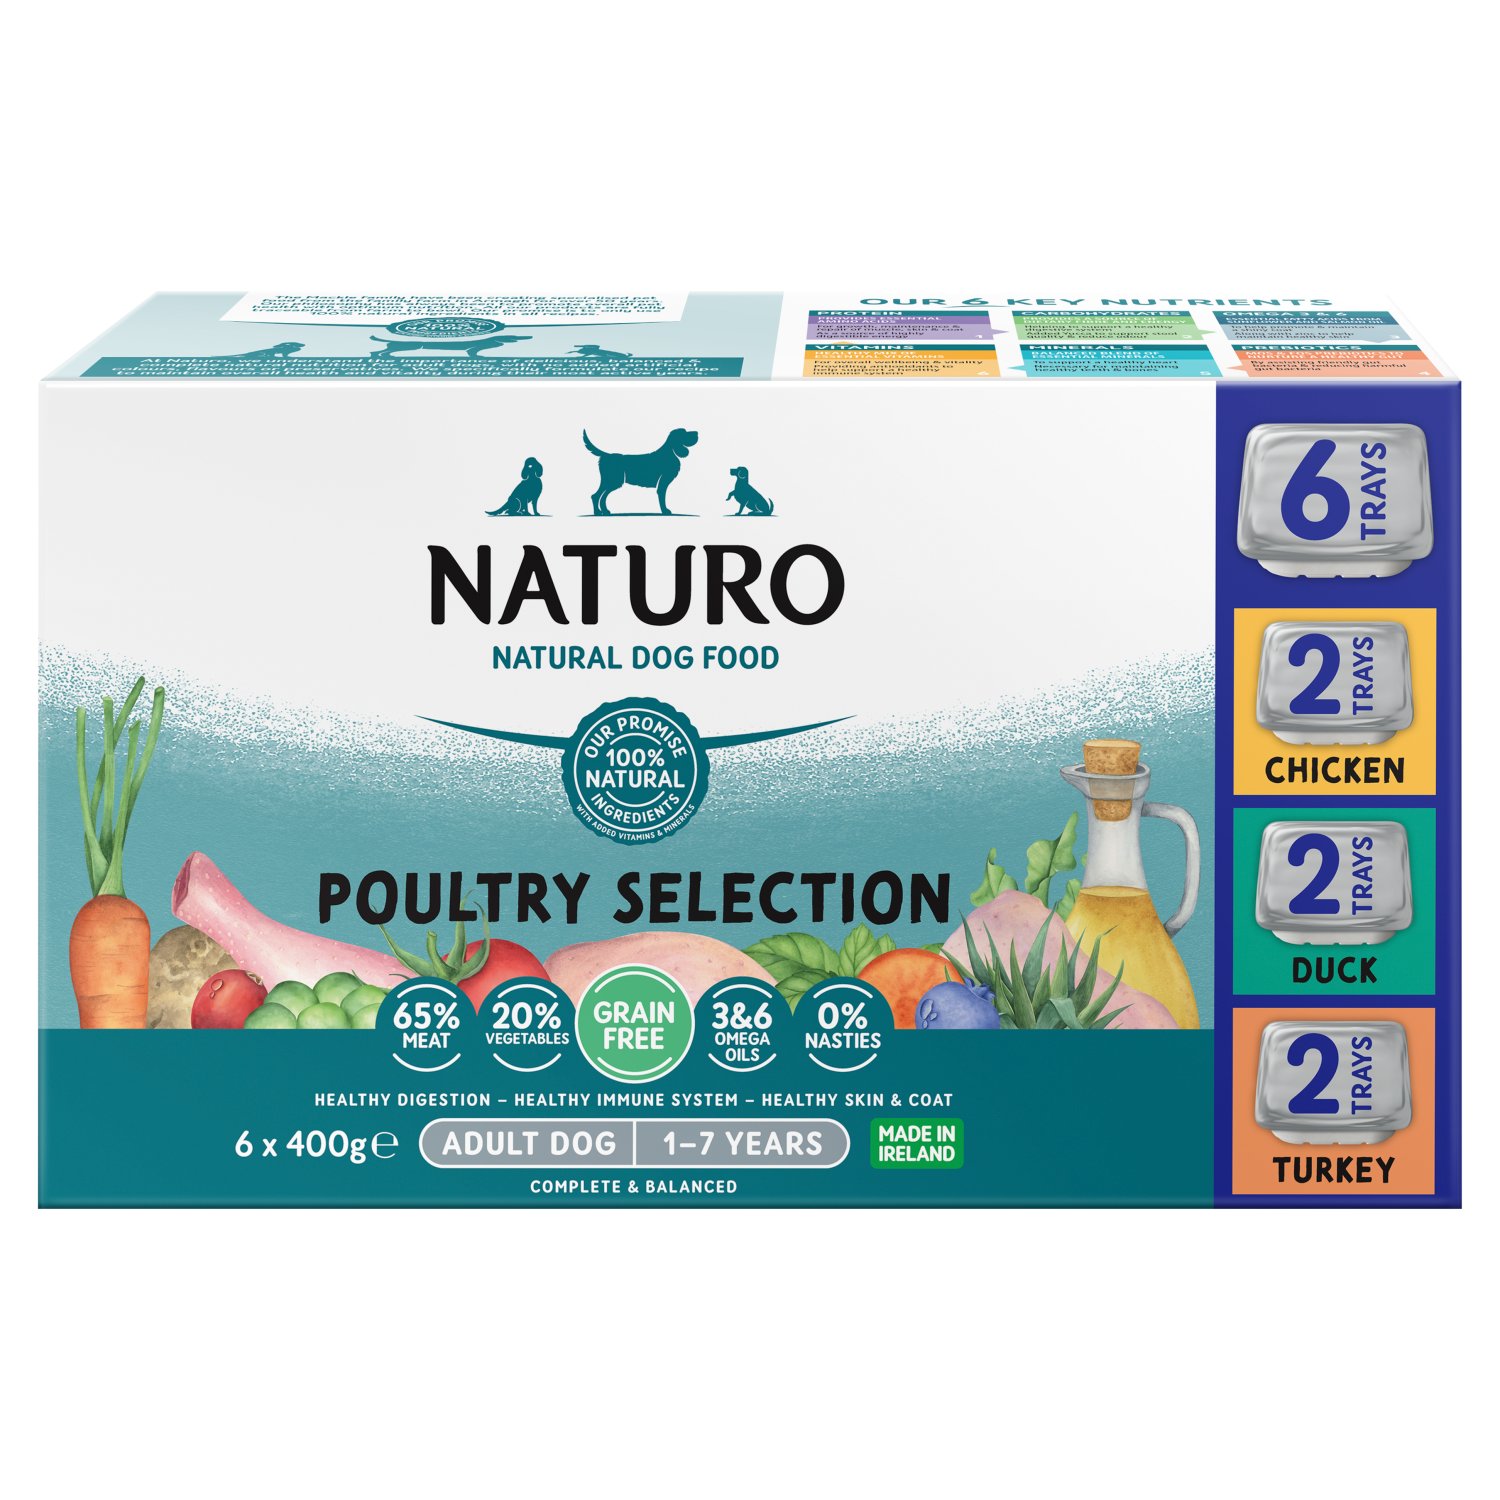 Naturo is a complete pet food for adult dogs.

The Essential Mix: We combine the key food groups to create a natural and nutritious meal for your dog that is formulated to support their health and well-being through all life stages.

Essential Proteins
Packed full of essential amino acids provided from quality and palatable Chicken, Duck & Turkey to help promote muscle growth and repair.

Fibre & Carbohydrates
Our range of natural Vegetables provides a highly digestible source of carbohydrates for delivering energy and dietary fibre for supporting a healthy digestive system.

Vitamins & Minerals
Balanced blend of all the essential vitamins and minerals required, including vitamins A, D & E and calcium to support the immune system, strong teeth and bones.

Fats & Oils
Omega 3 & 6*
*Contains Sunflower and Salmon oils providing Omega 3 and 6 fatty acids to help maintain healthy skin and promote a shiny coat.